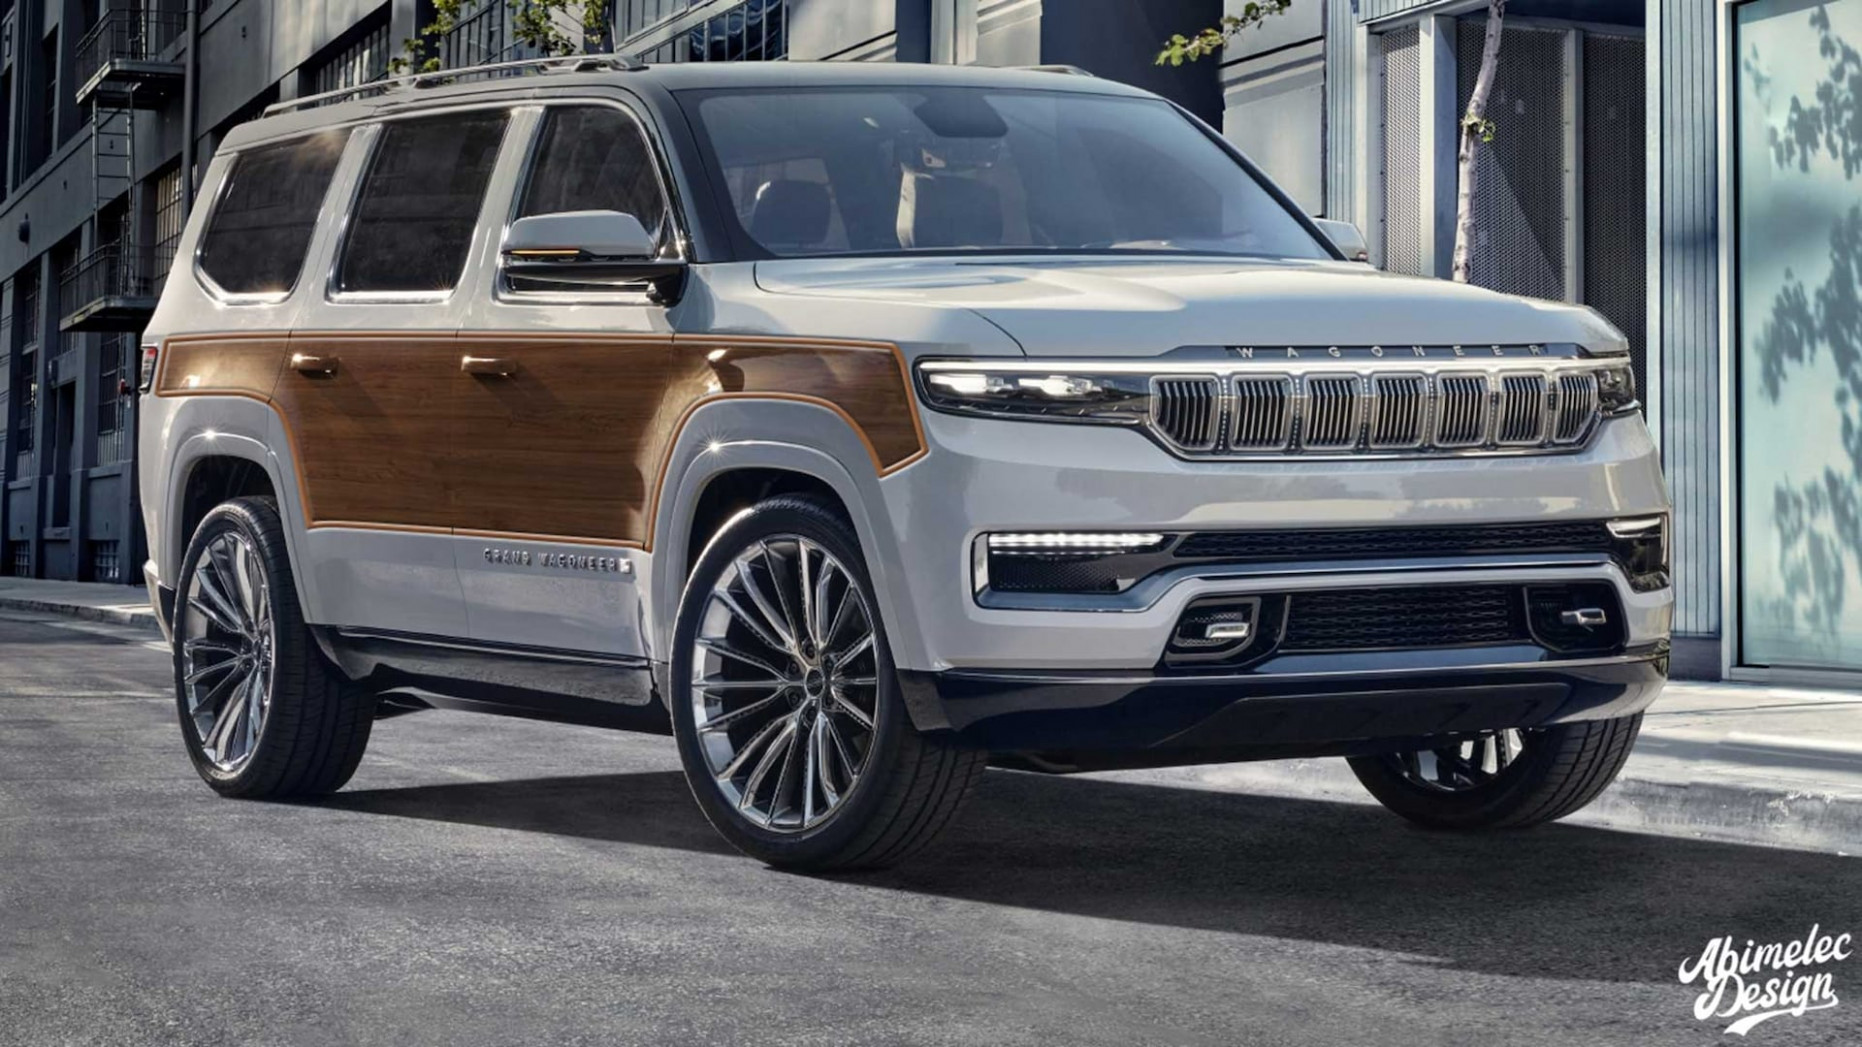 Model 2022 jeep wagoneer images